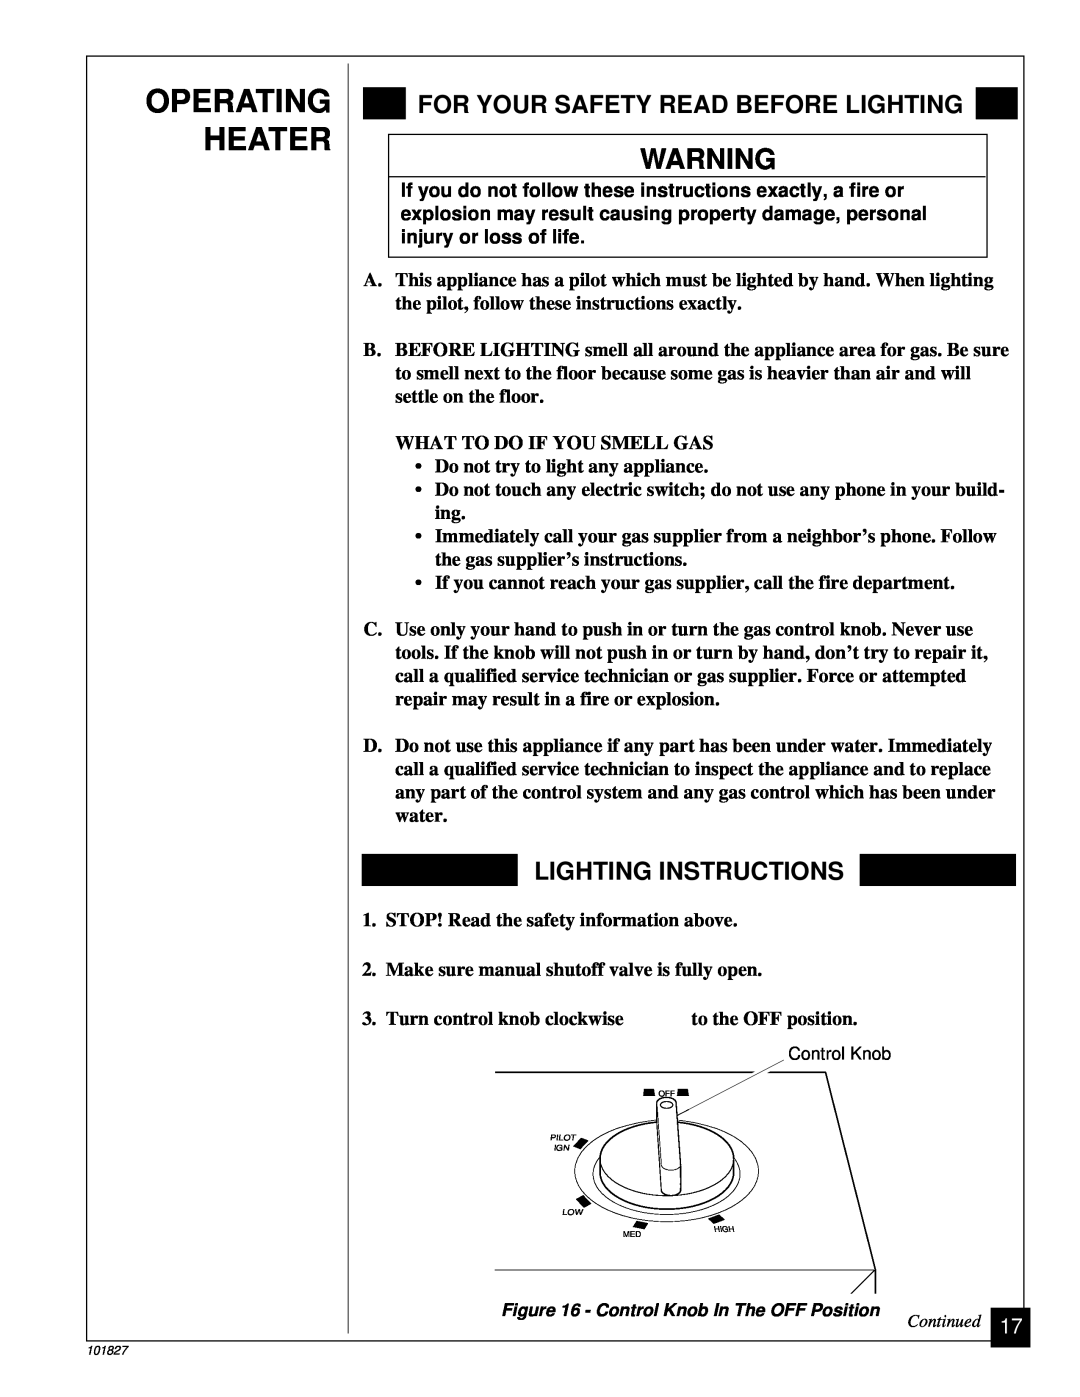 Desa CGP26D, CGP16RA installation manual Operating, Heater, For Your Safety Read Before Lighting, Lighting Instructions 